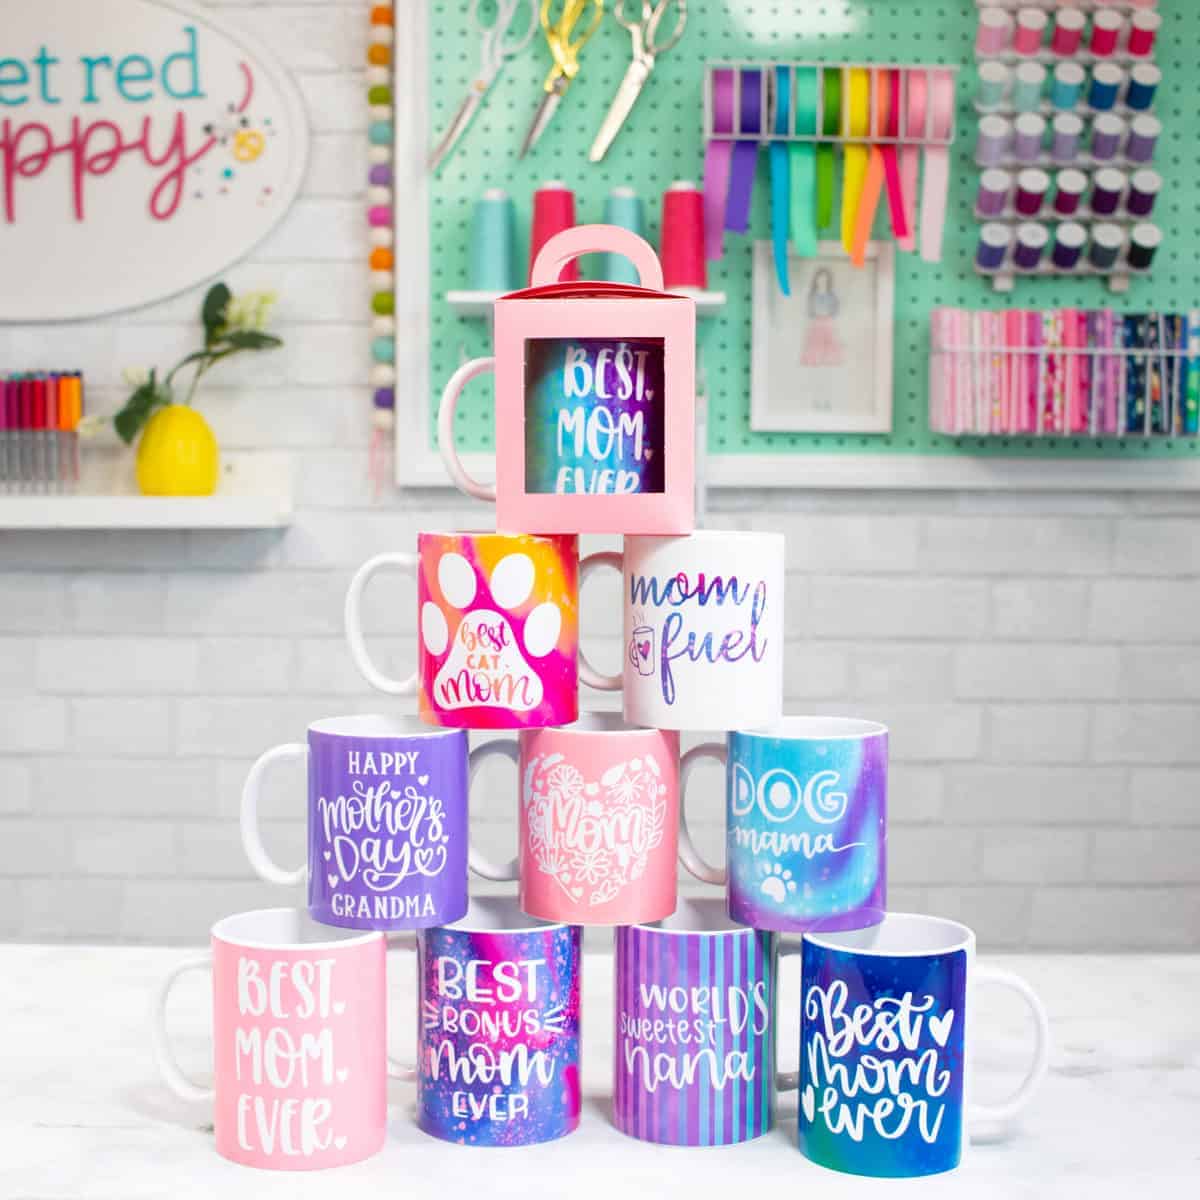 DIY Cricut Mother's Day Gift Ideas: Make the Perfect Gift for Mom